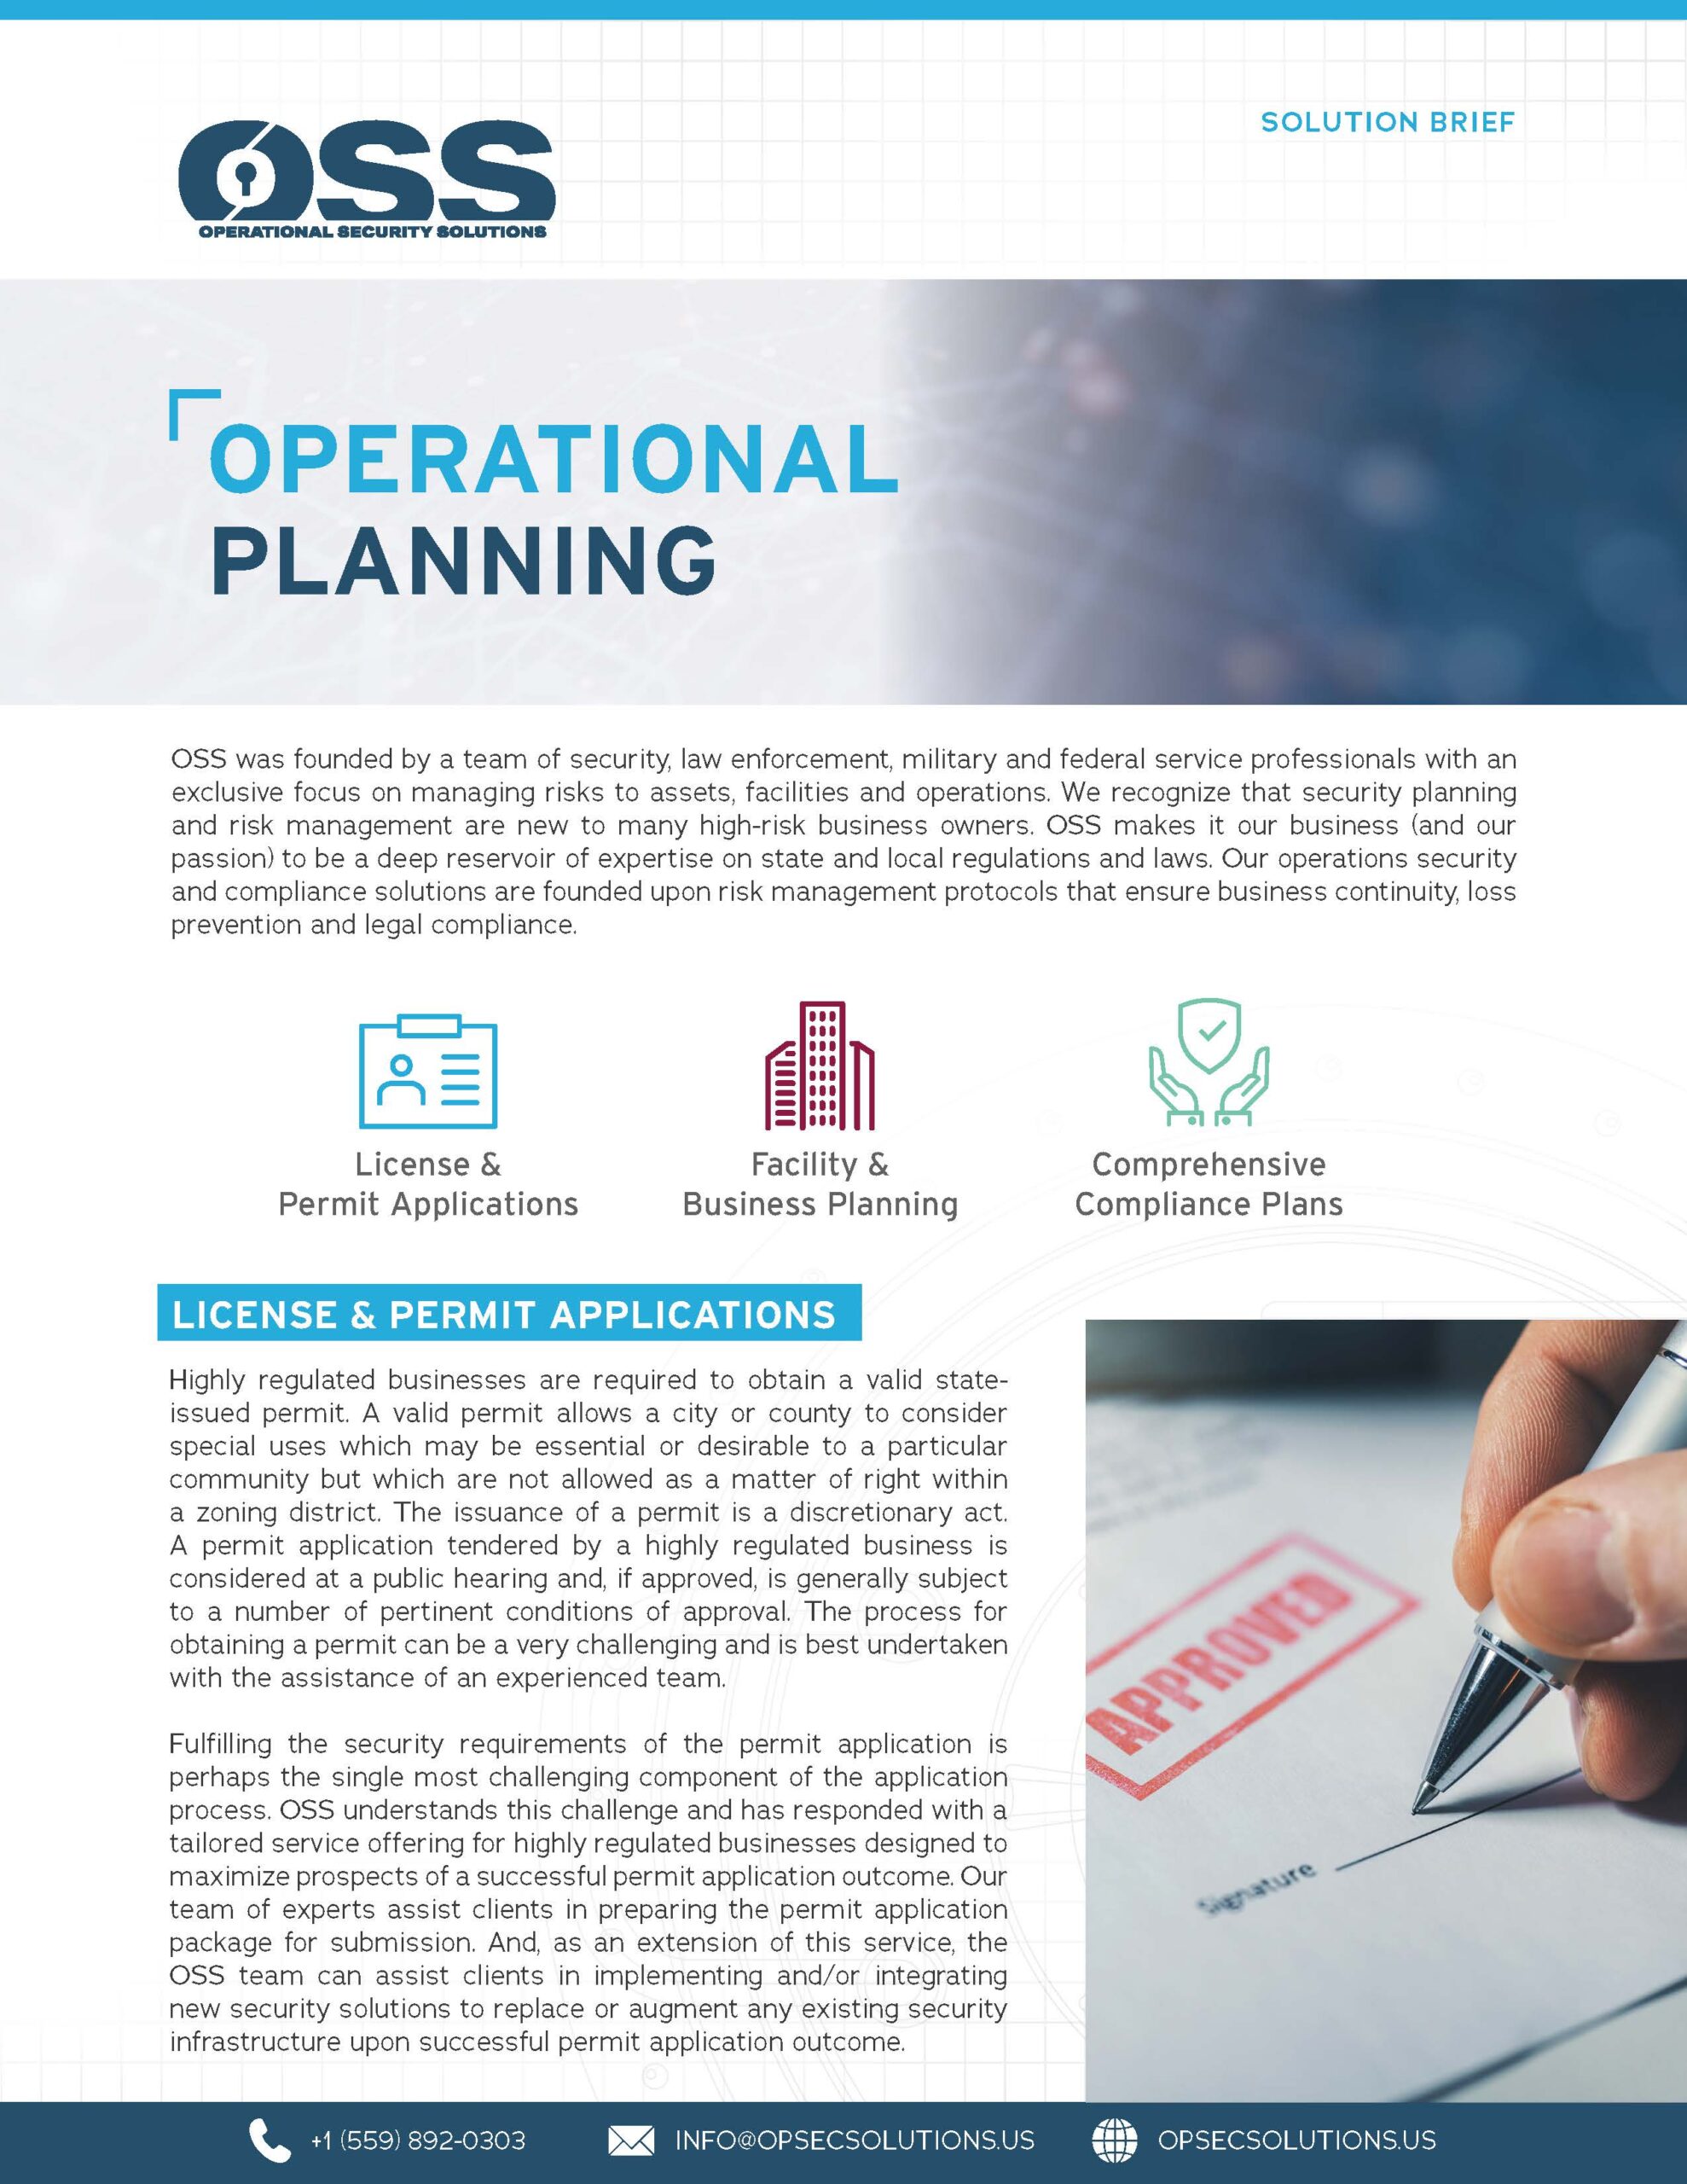 Operational Planning, Cash Compliance